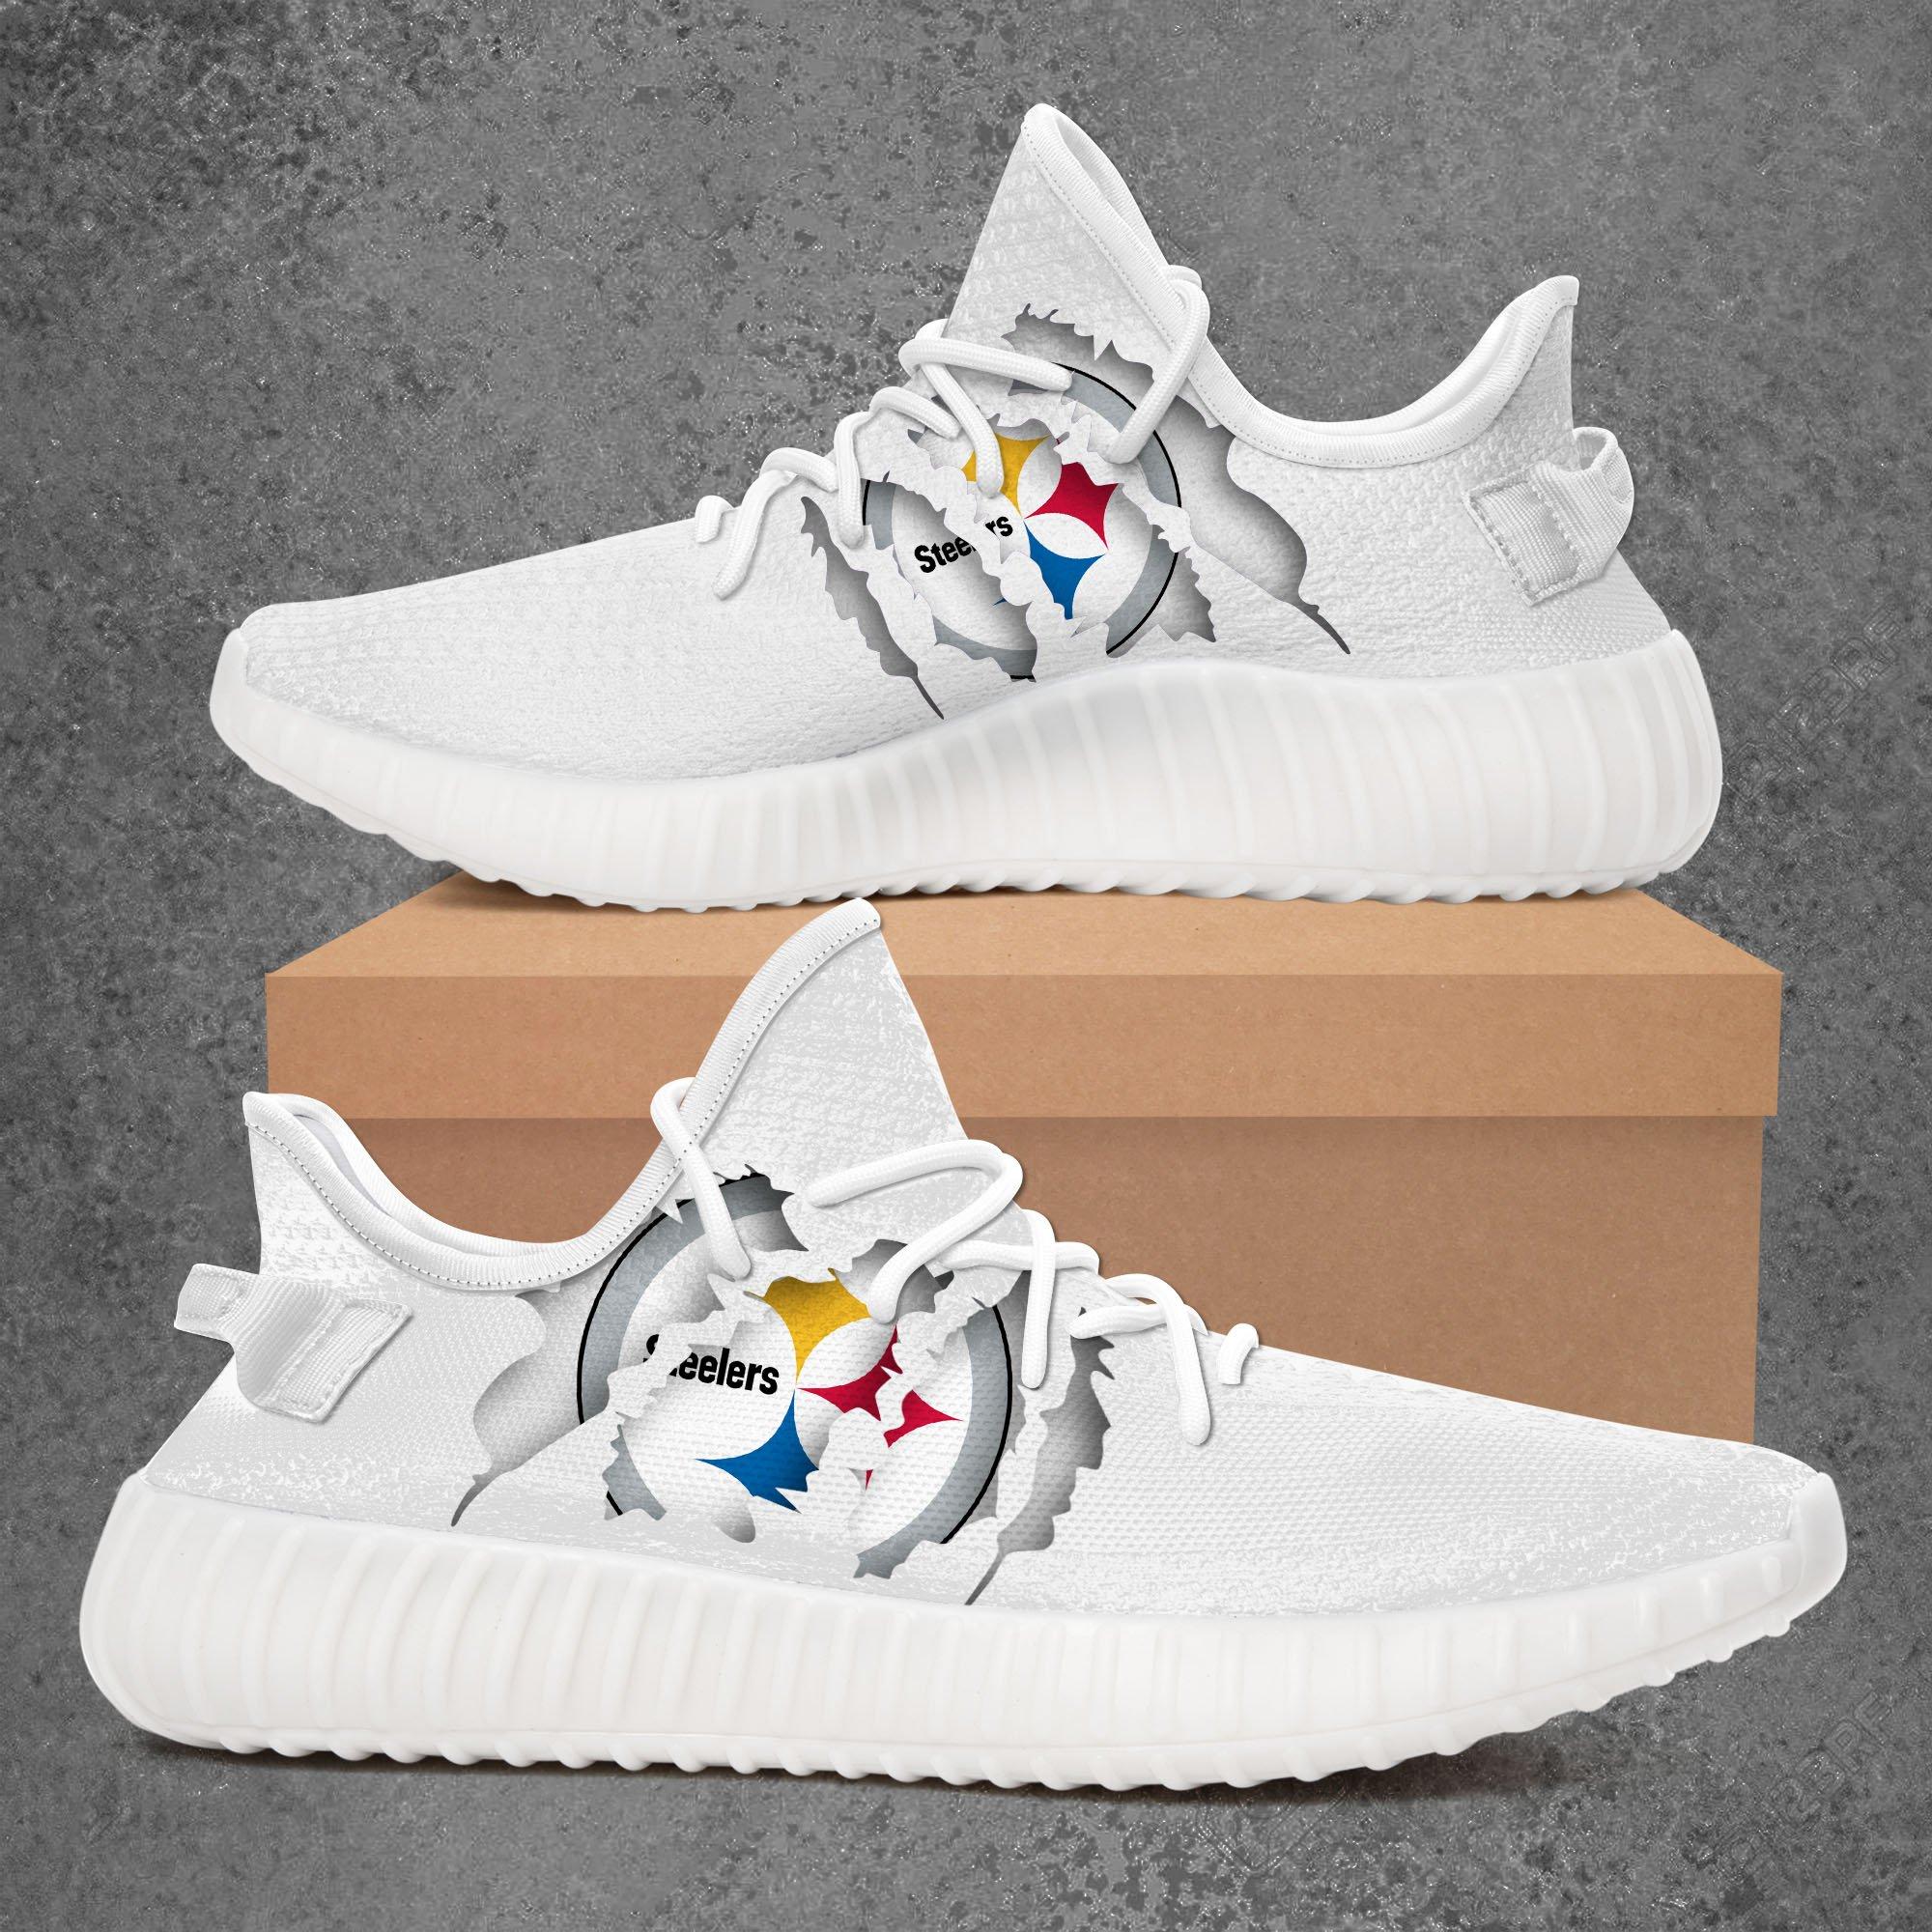 sneaker limited edition nfl